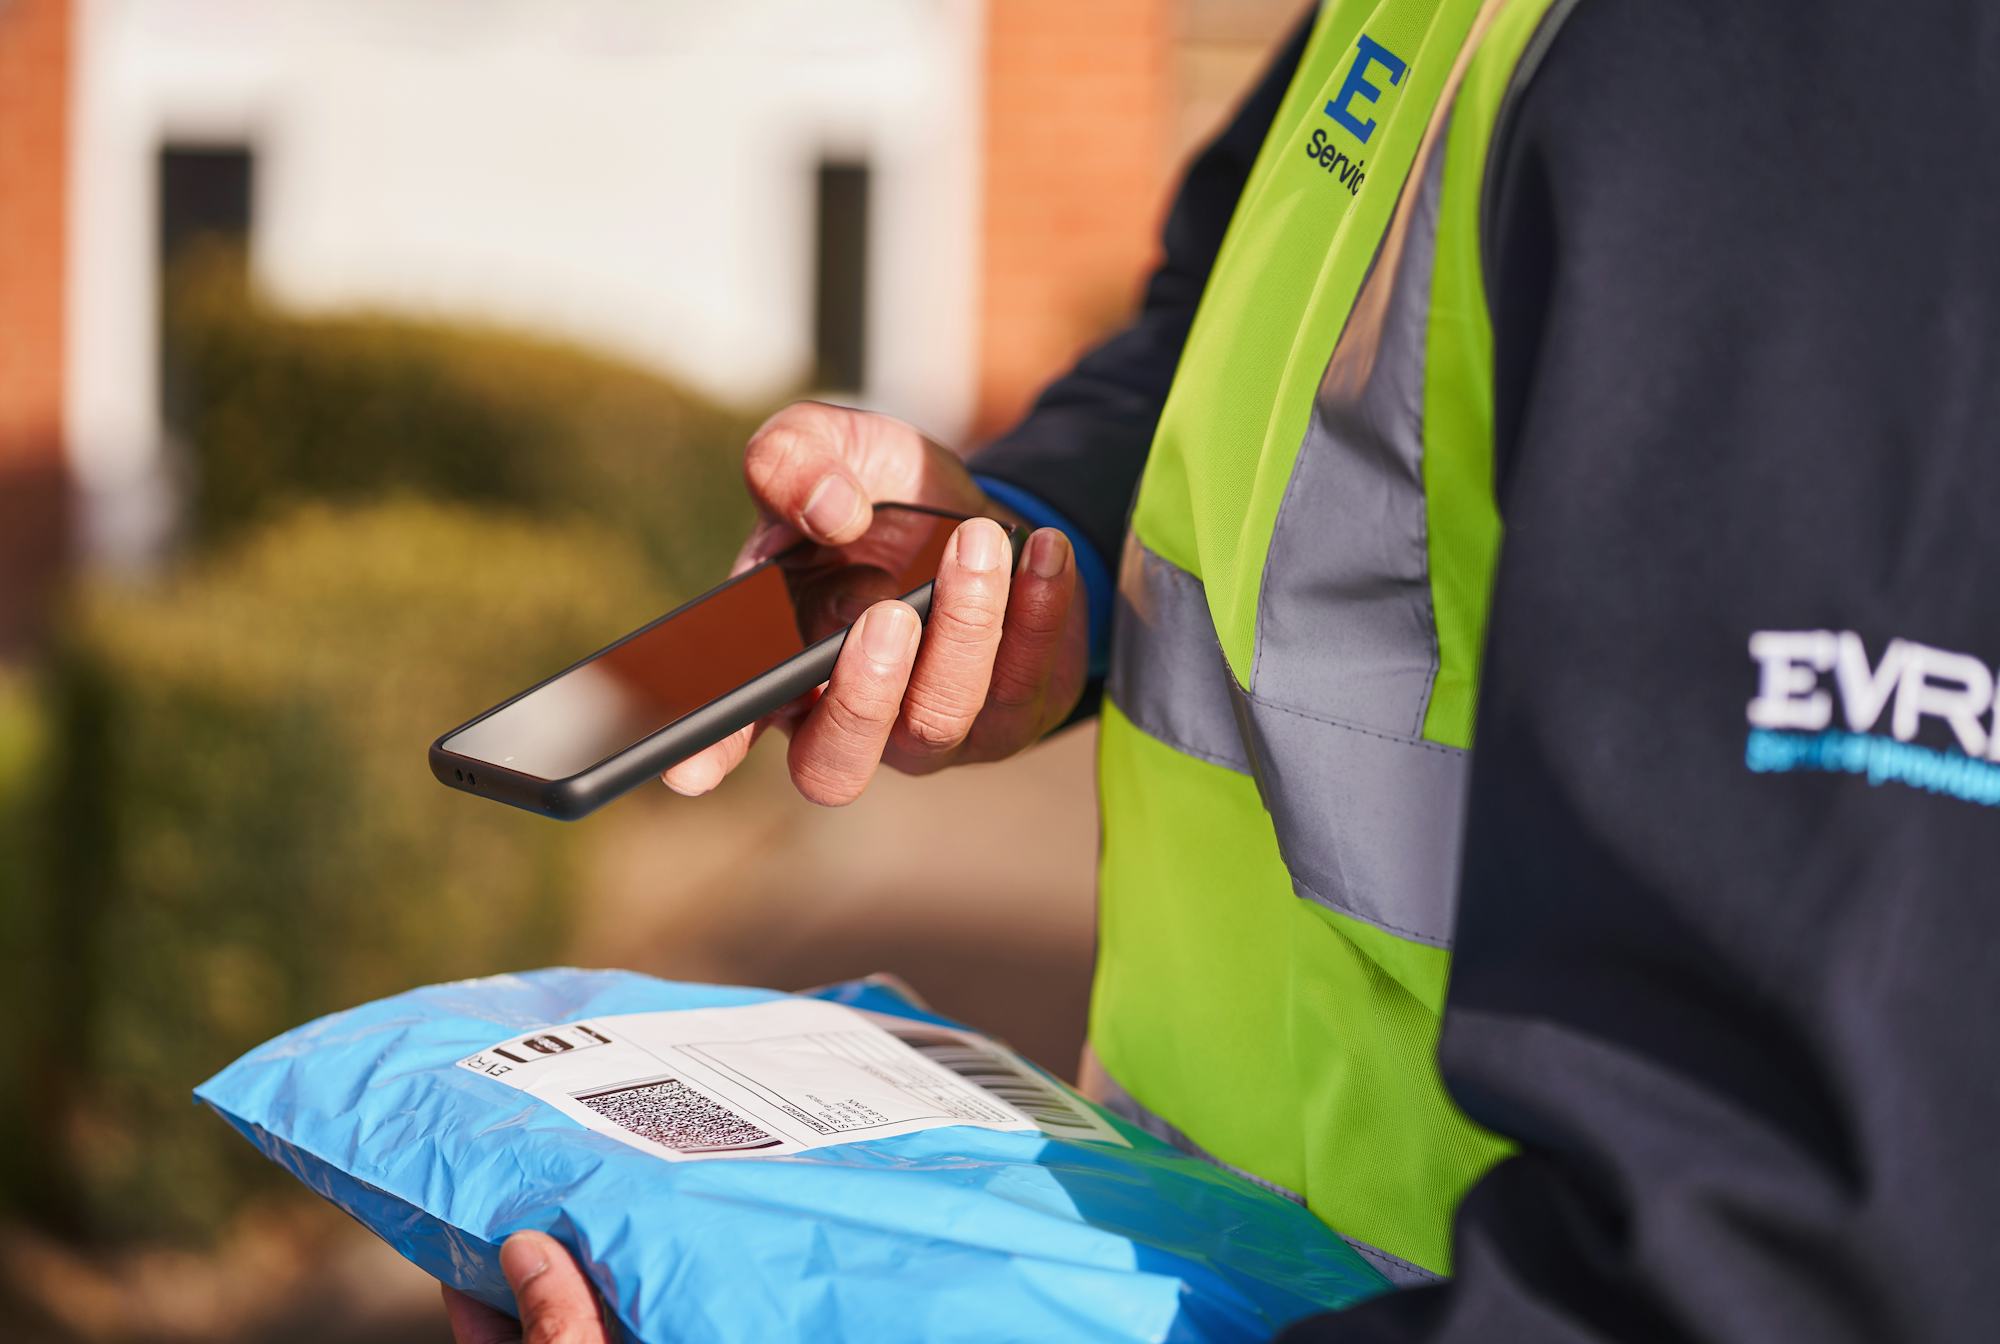 courier scanning parcel with smartphone outdoors